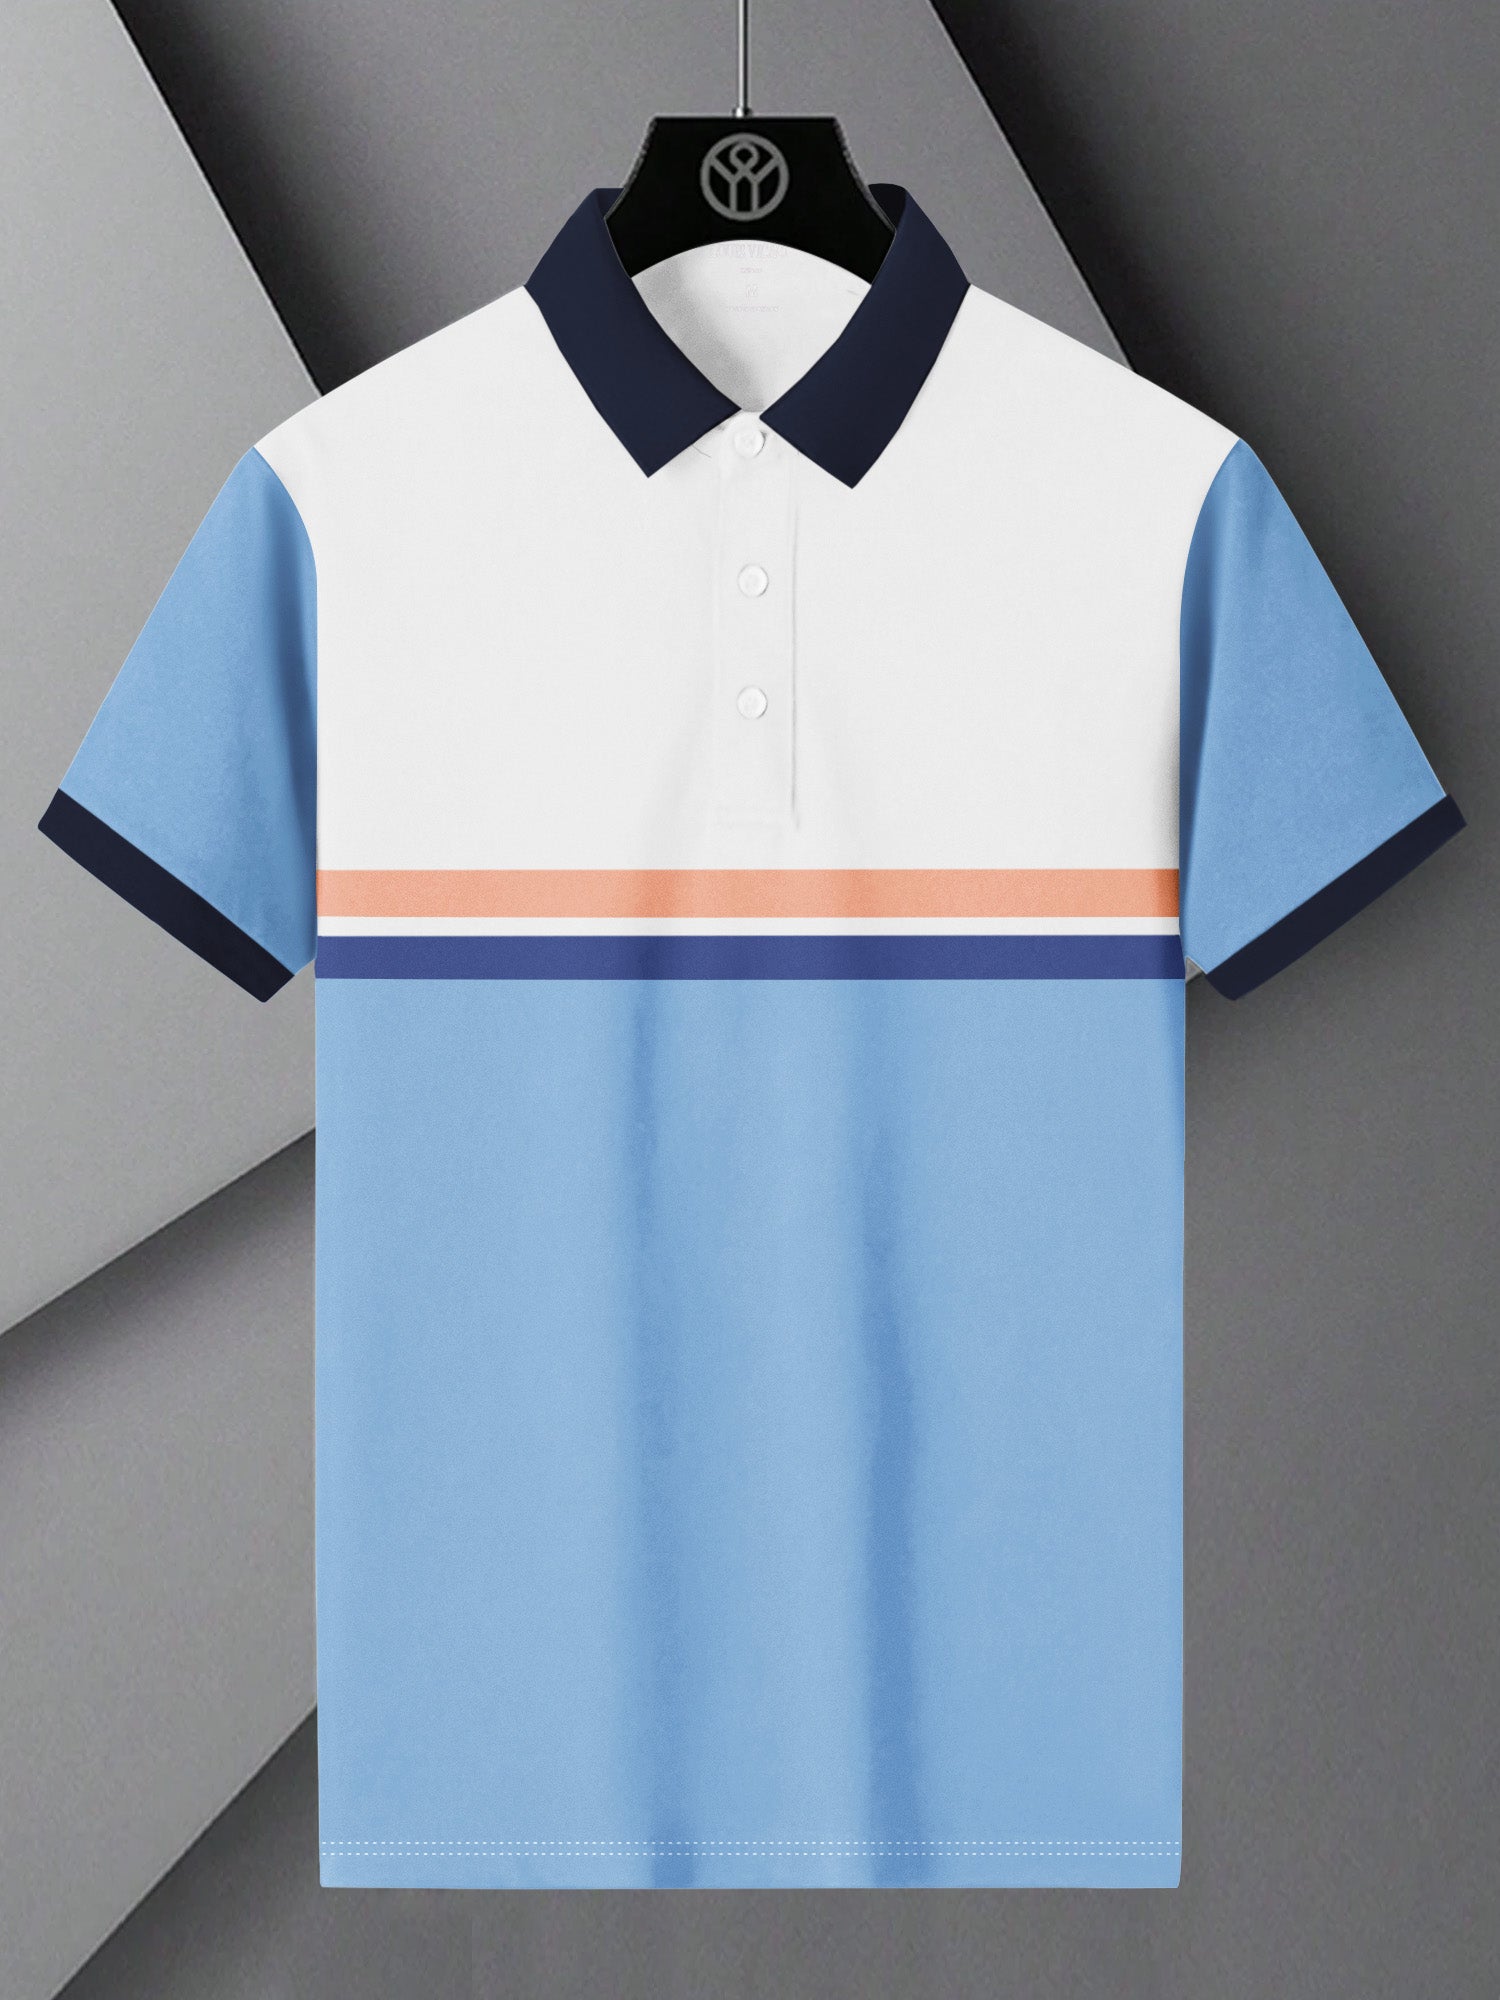 NXT Summer Polo Shirt For Men-White with Sky & Orange Stripe-BE815/BR13056